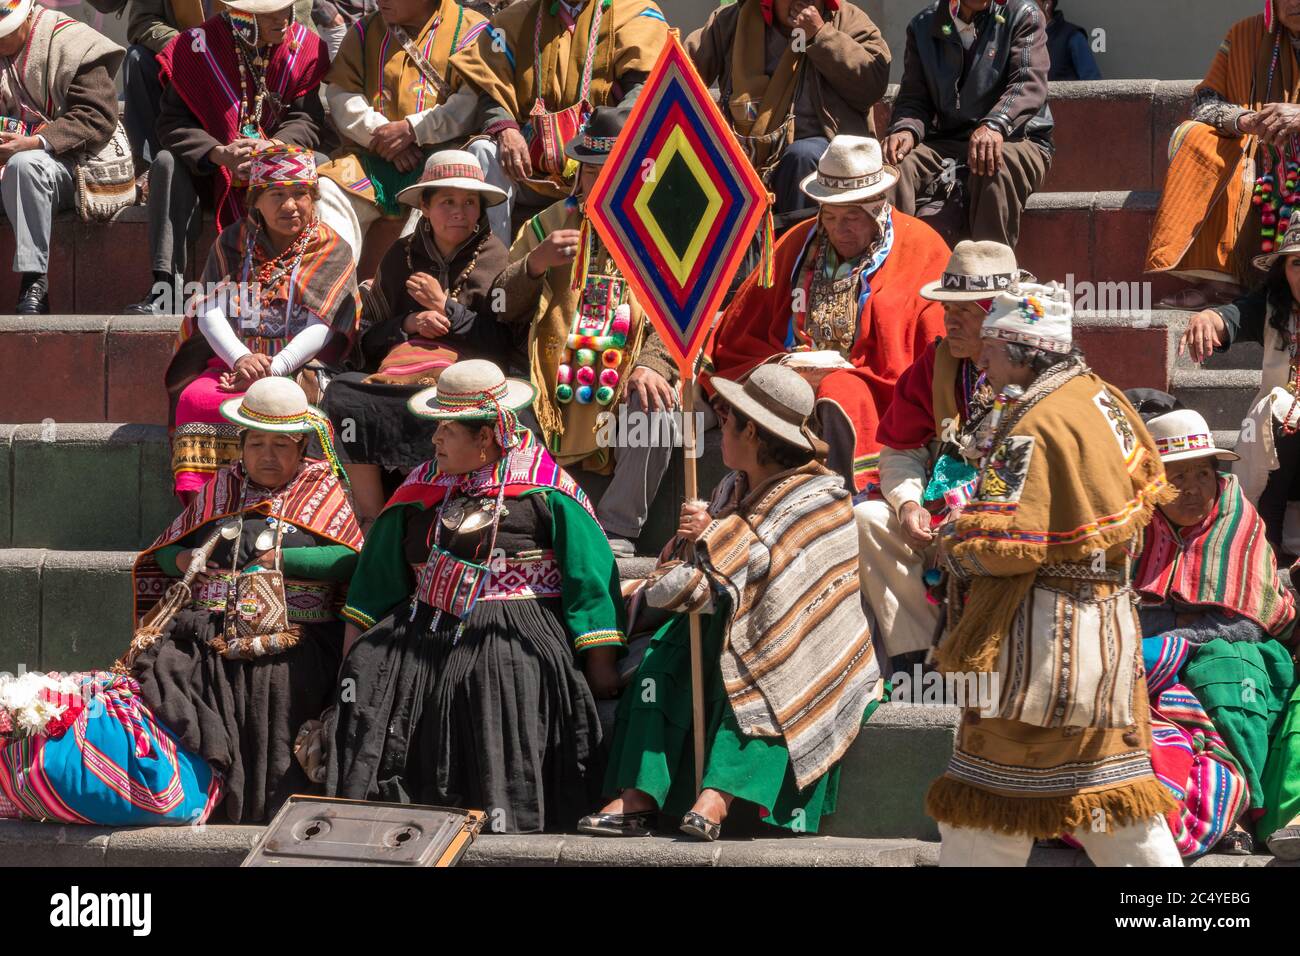 La Paz, Bolivia - september 30, 2018: Bolivian traditional medicine sorcerer performs in San Francisco square in front of a crowd in traditional cloth Stock Photo